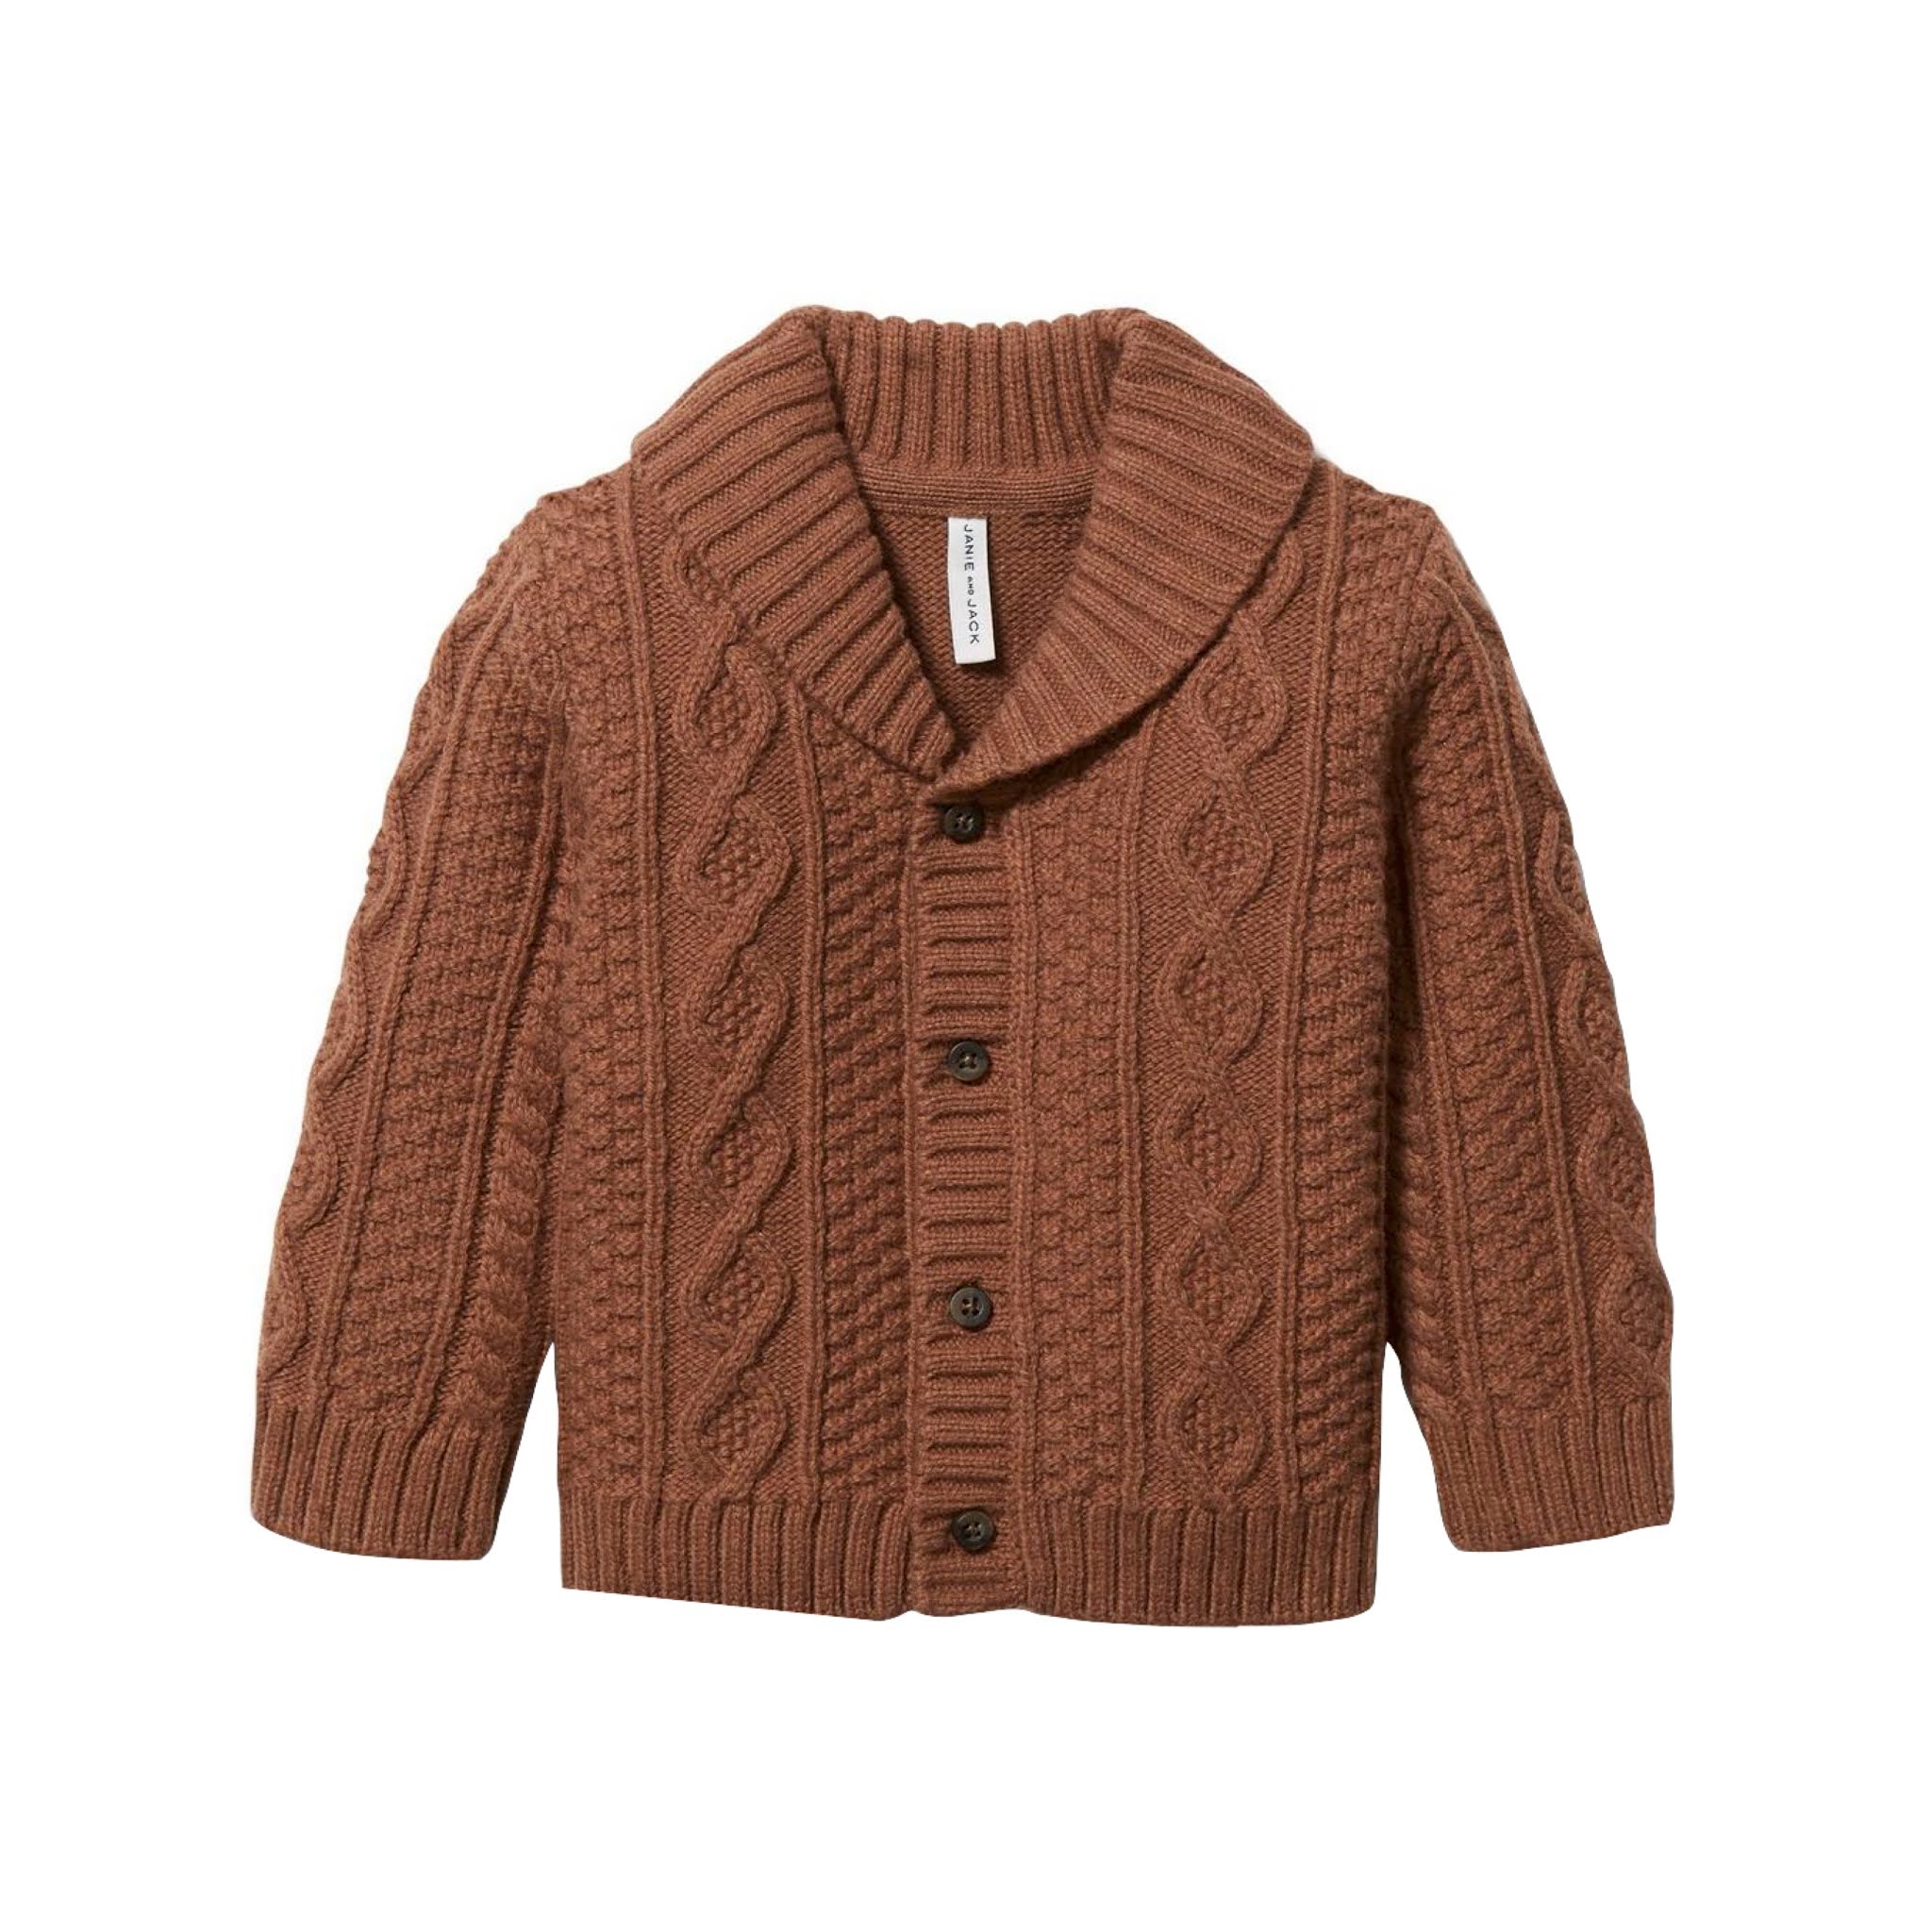 Baby Cable Knit Cardigan from Janie and Jack